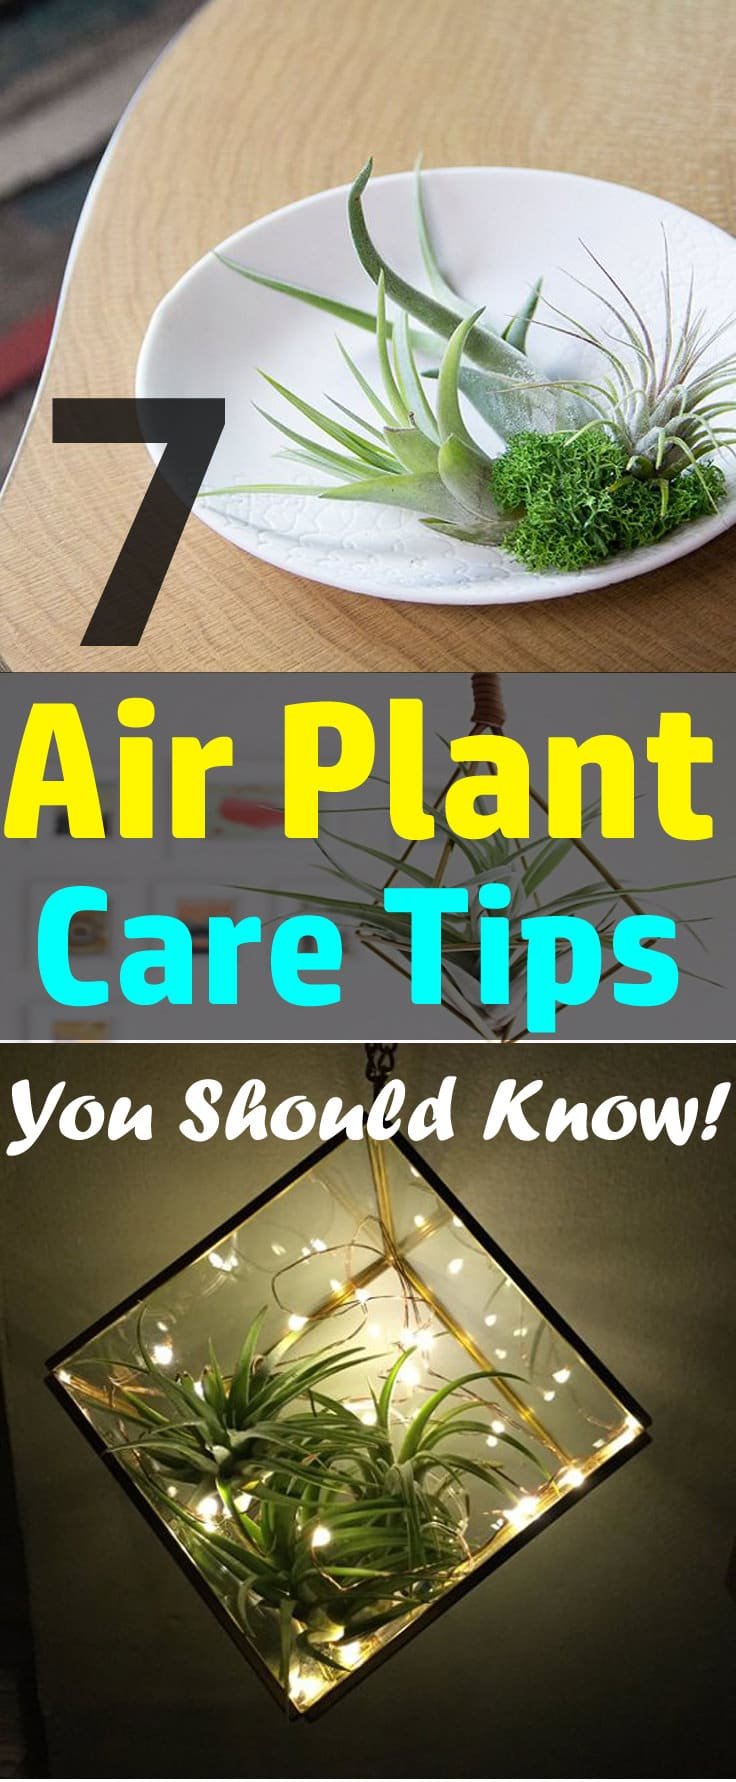 Want to grow air plants indoors? Check out the 7 most helpful Air Plant Care Tips before you start!